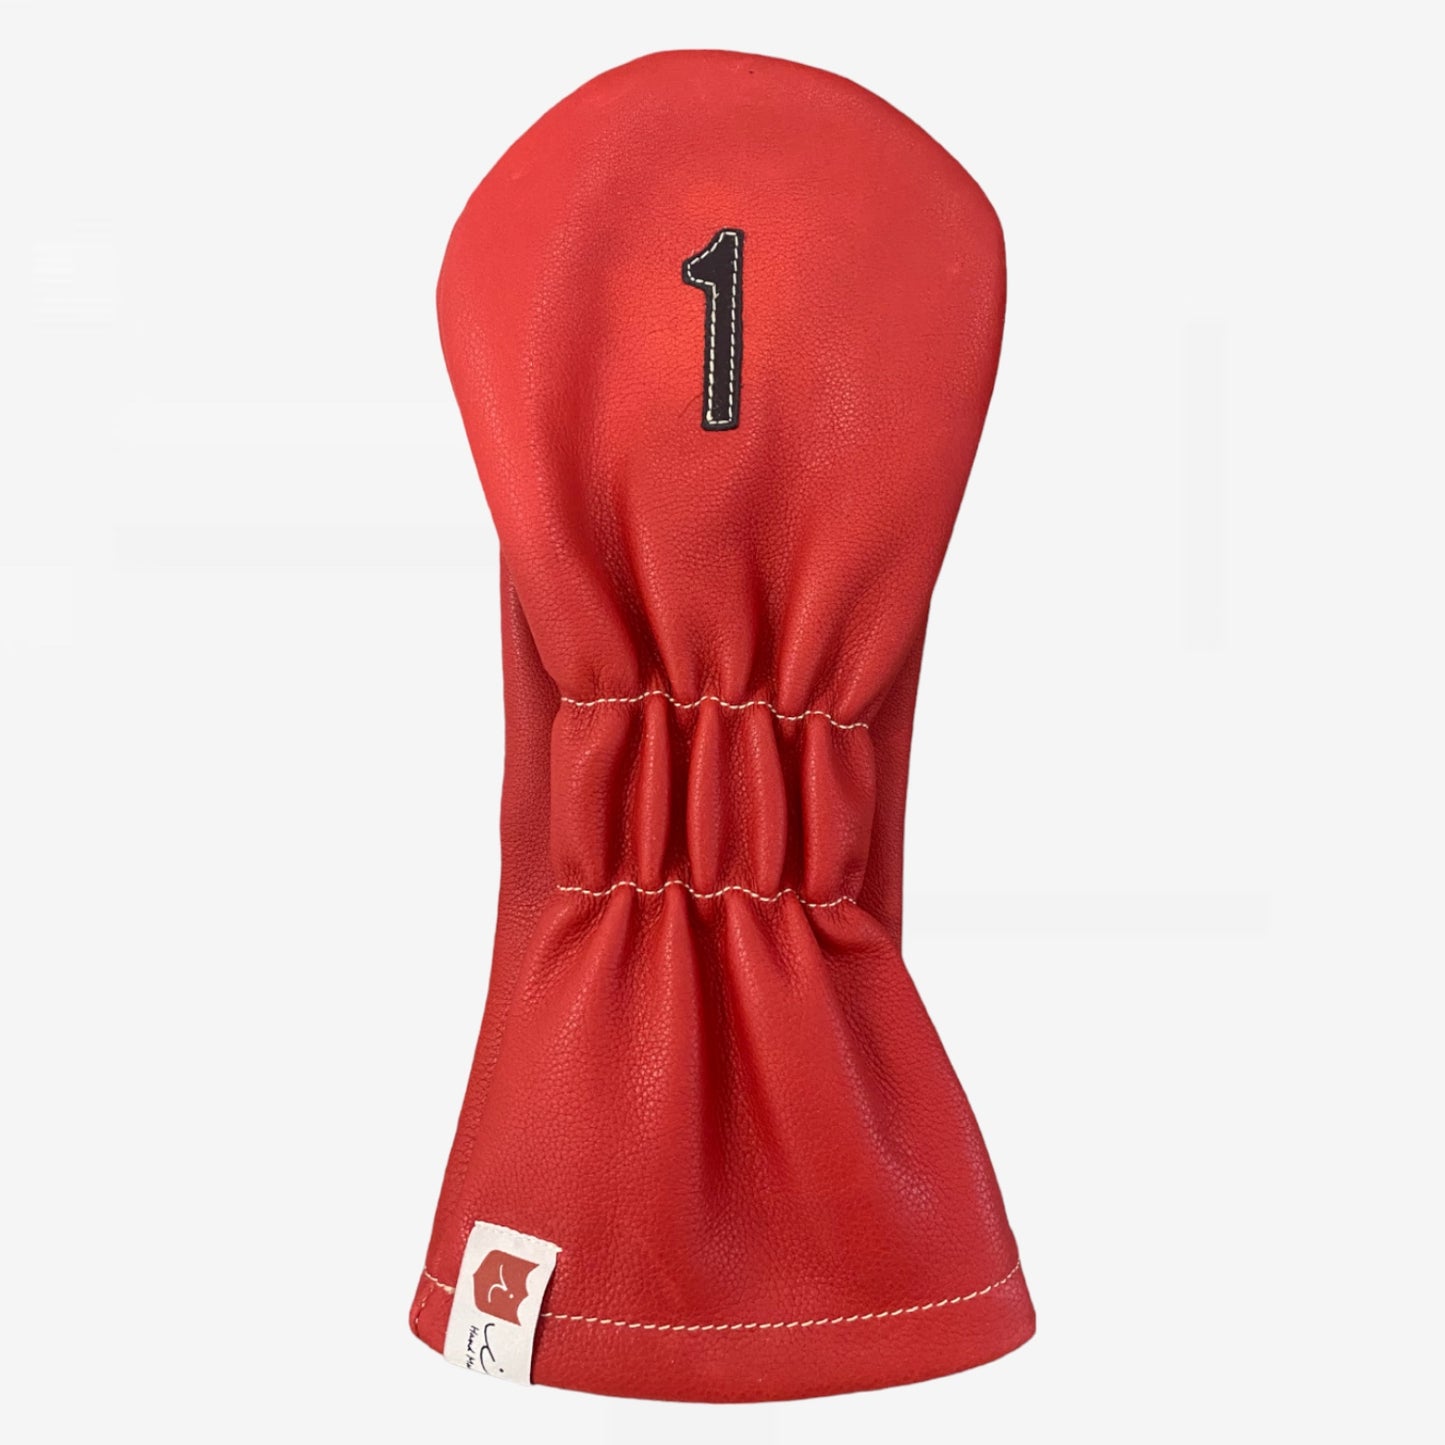 Argyle Headcover: Sunday Red + Pitch Black